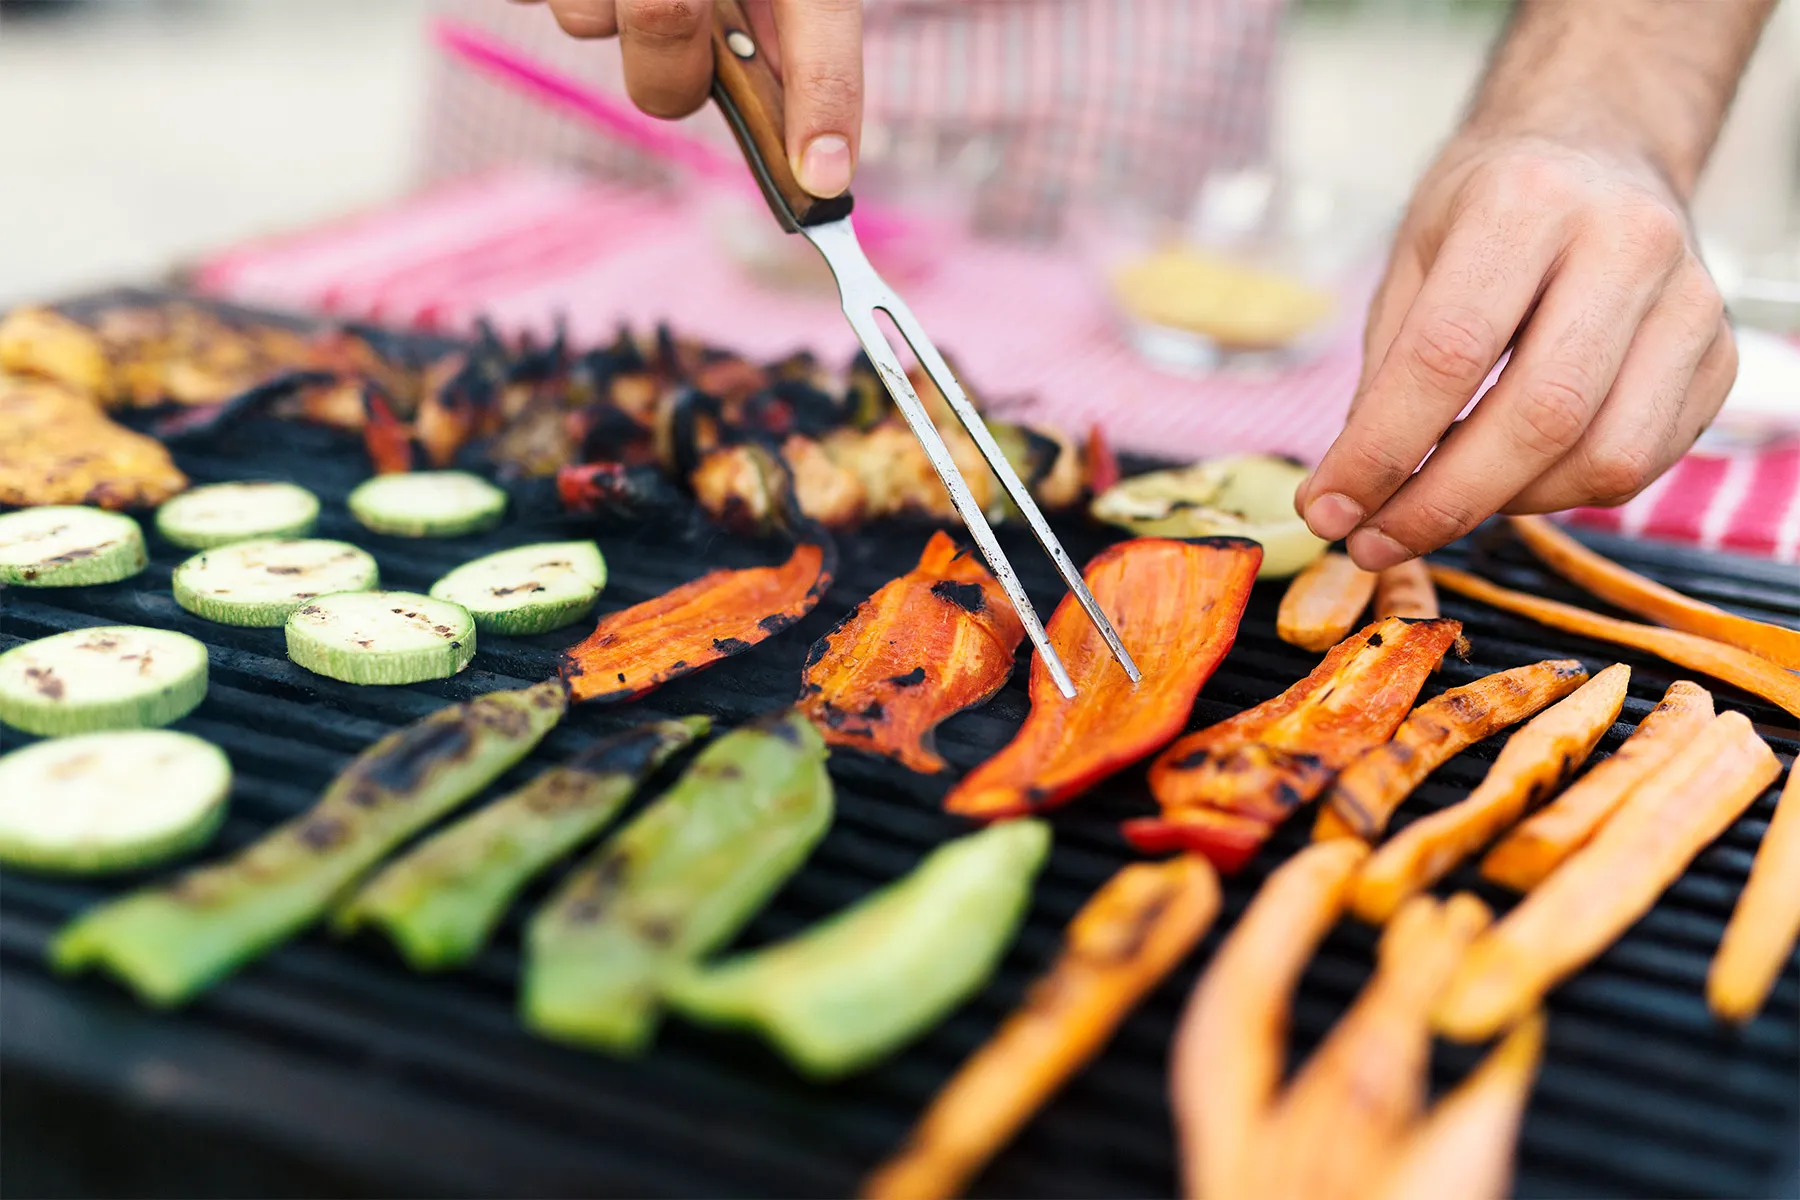 Toxins From Grilling, Smoking & Automobile Exhaust Might Elevate Odds for RA